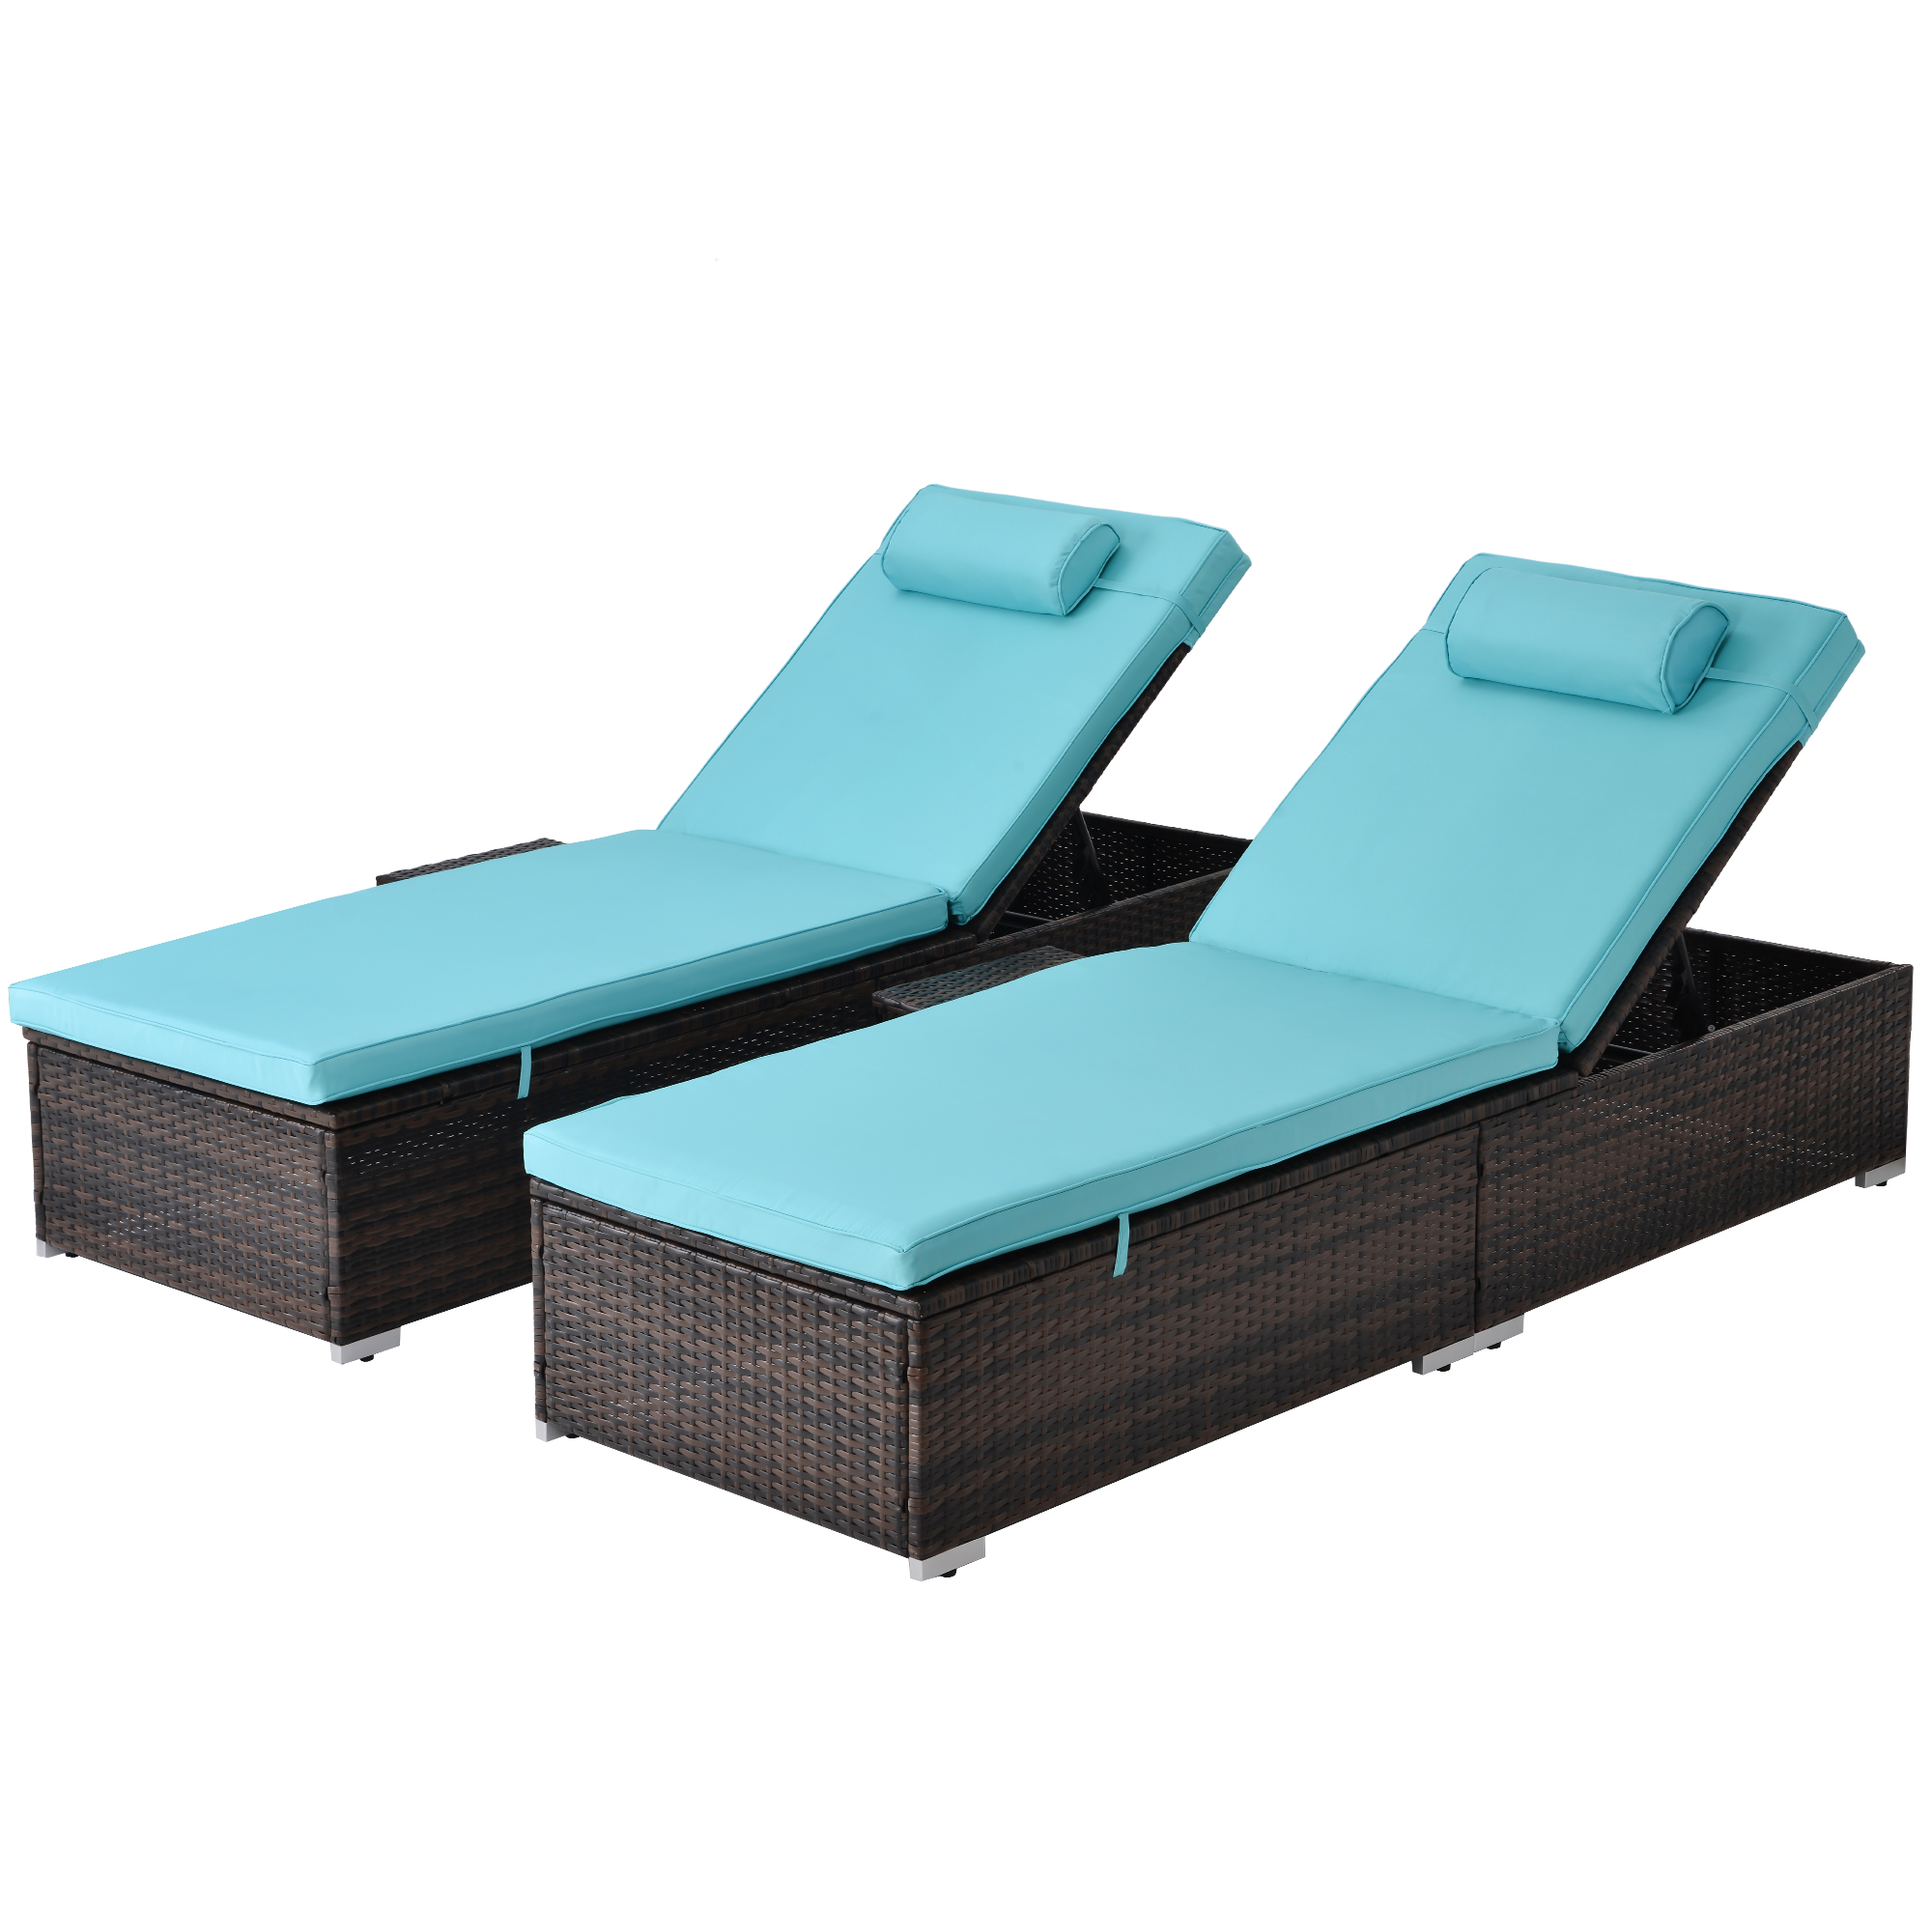 Clearance! Patio Chaise Lounge Chairs, 2 Piece Outdoor Wicker Adjustable Backrest Recliners with Seat Cushion, Side Table&Head Pillow, Modern Rattan Reclining Chair Set for Balcony Pool Deck, J2474 - image 3 of 14